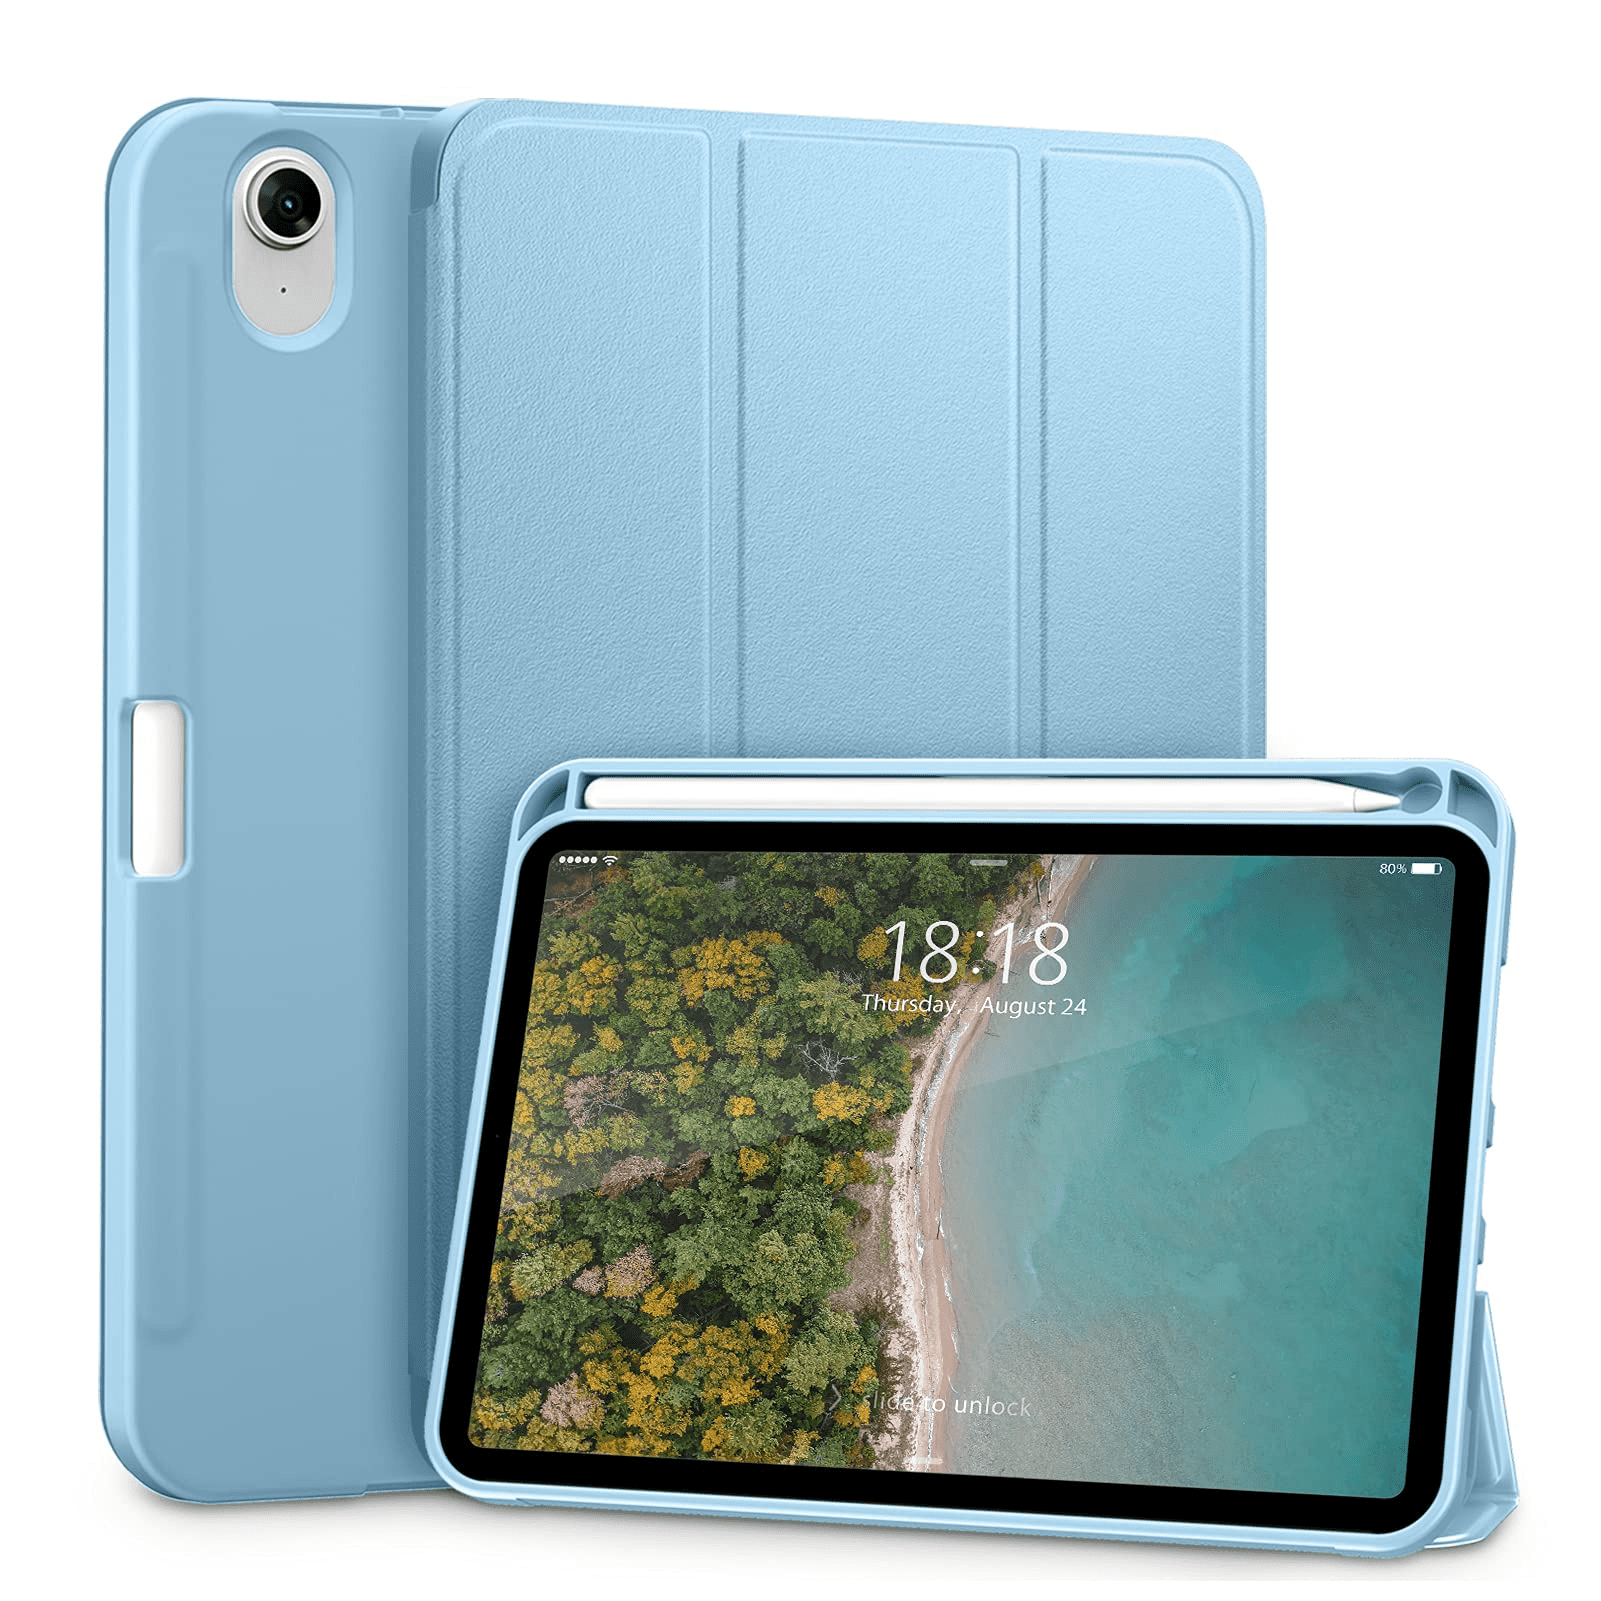 Mint Green Auto Sleep/Wake DTTO Case for iPad Mini 4, Ultra Slim Lightweight Smart Case Trifold Stand with Flexible Soft TPU Back Cover for iPad mini4 Not Compatible with Mini 5th Generation 2019 